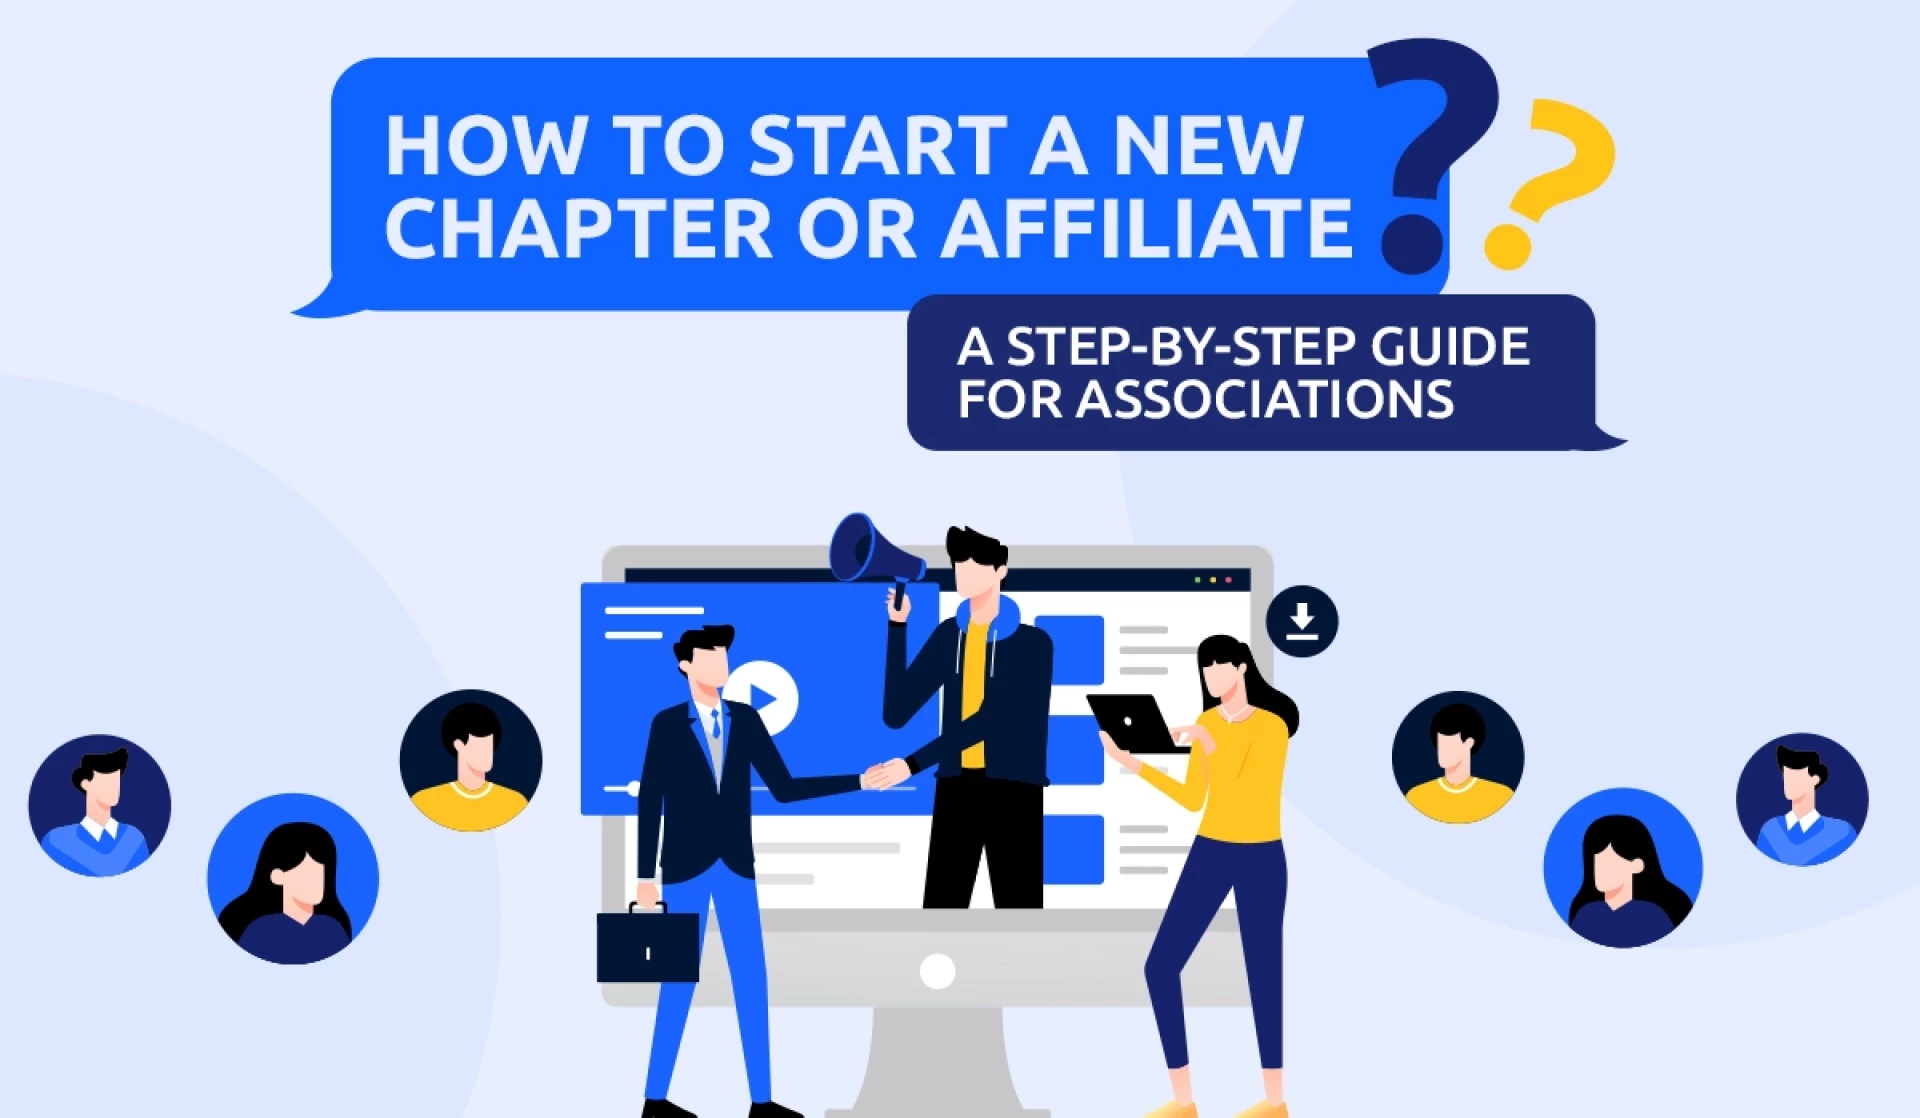 How to Start a New Chapter or Affiliate? [A Step-by-Step Guide for Associations]